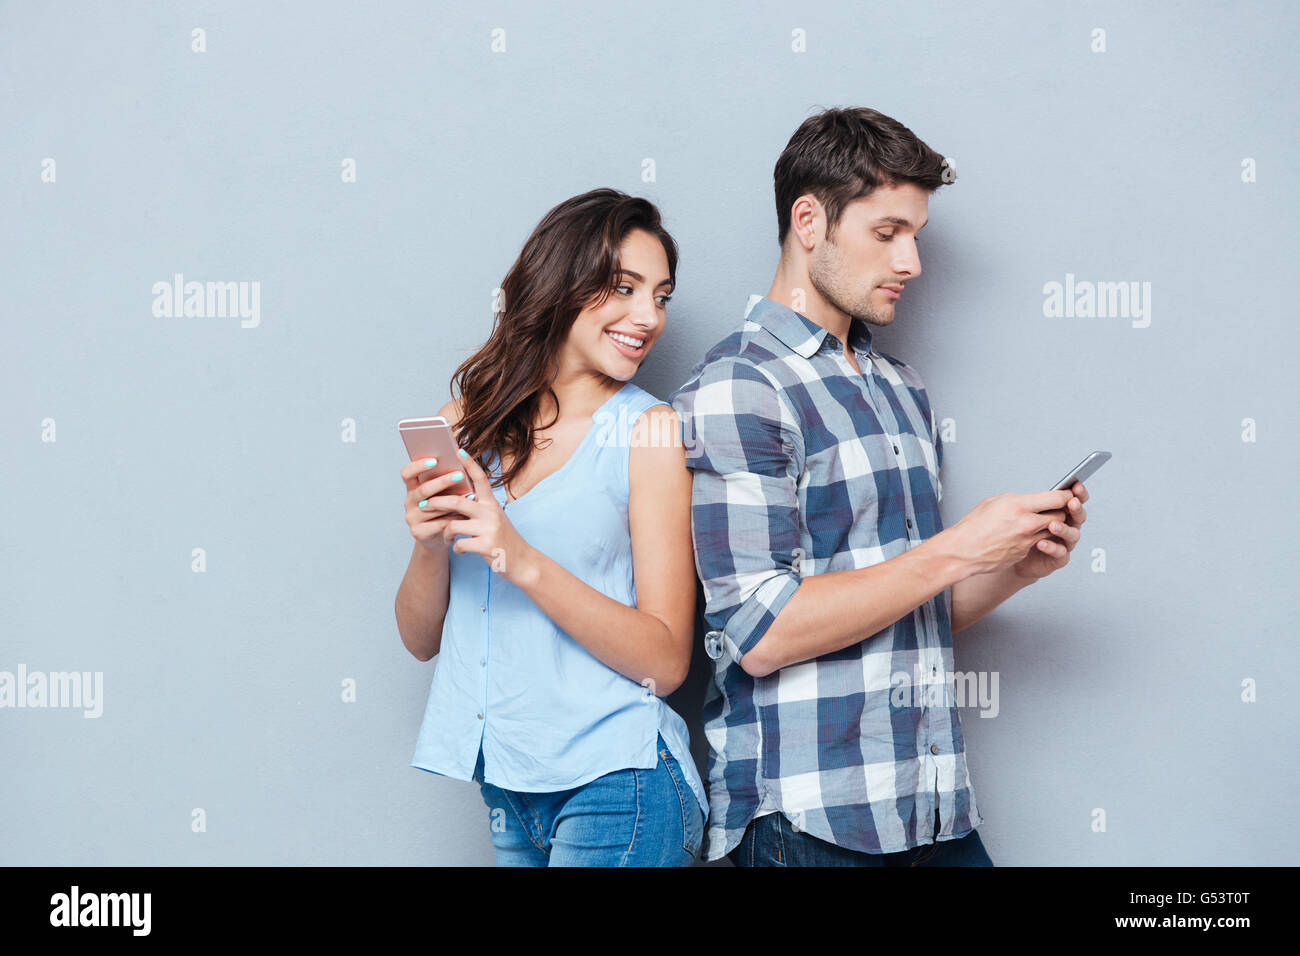 Jealous Girlfriend High Resolution Stock Photography and